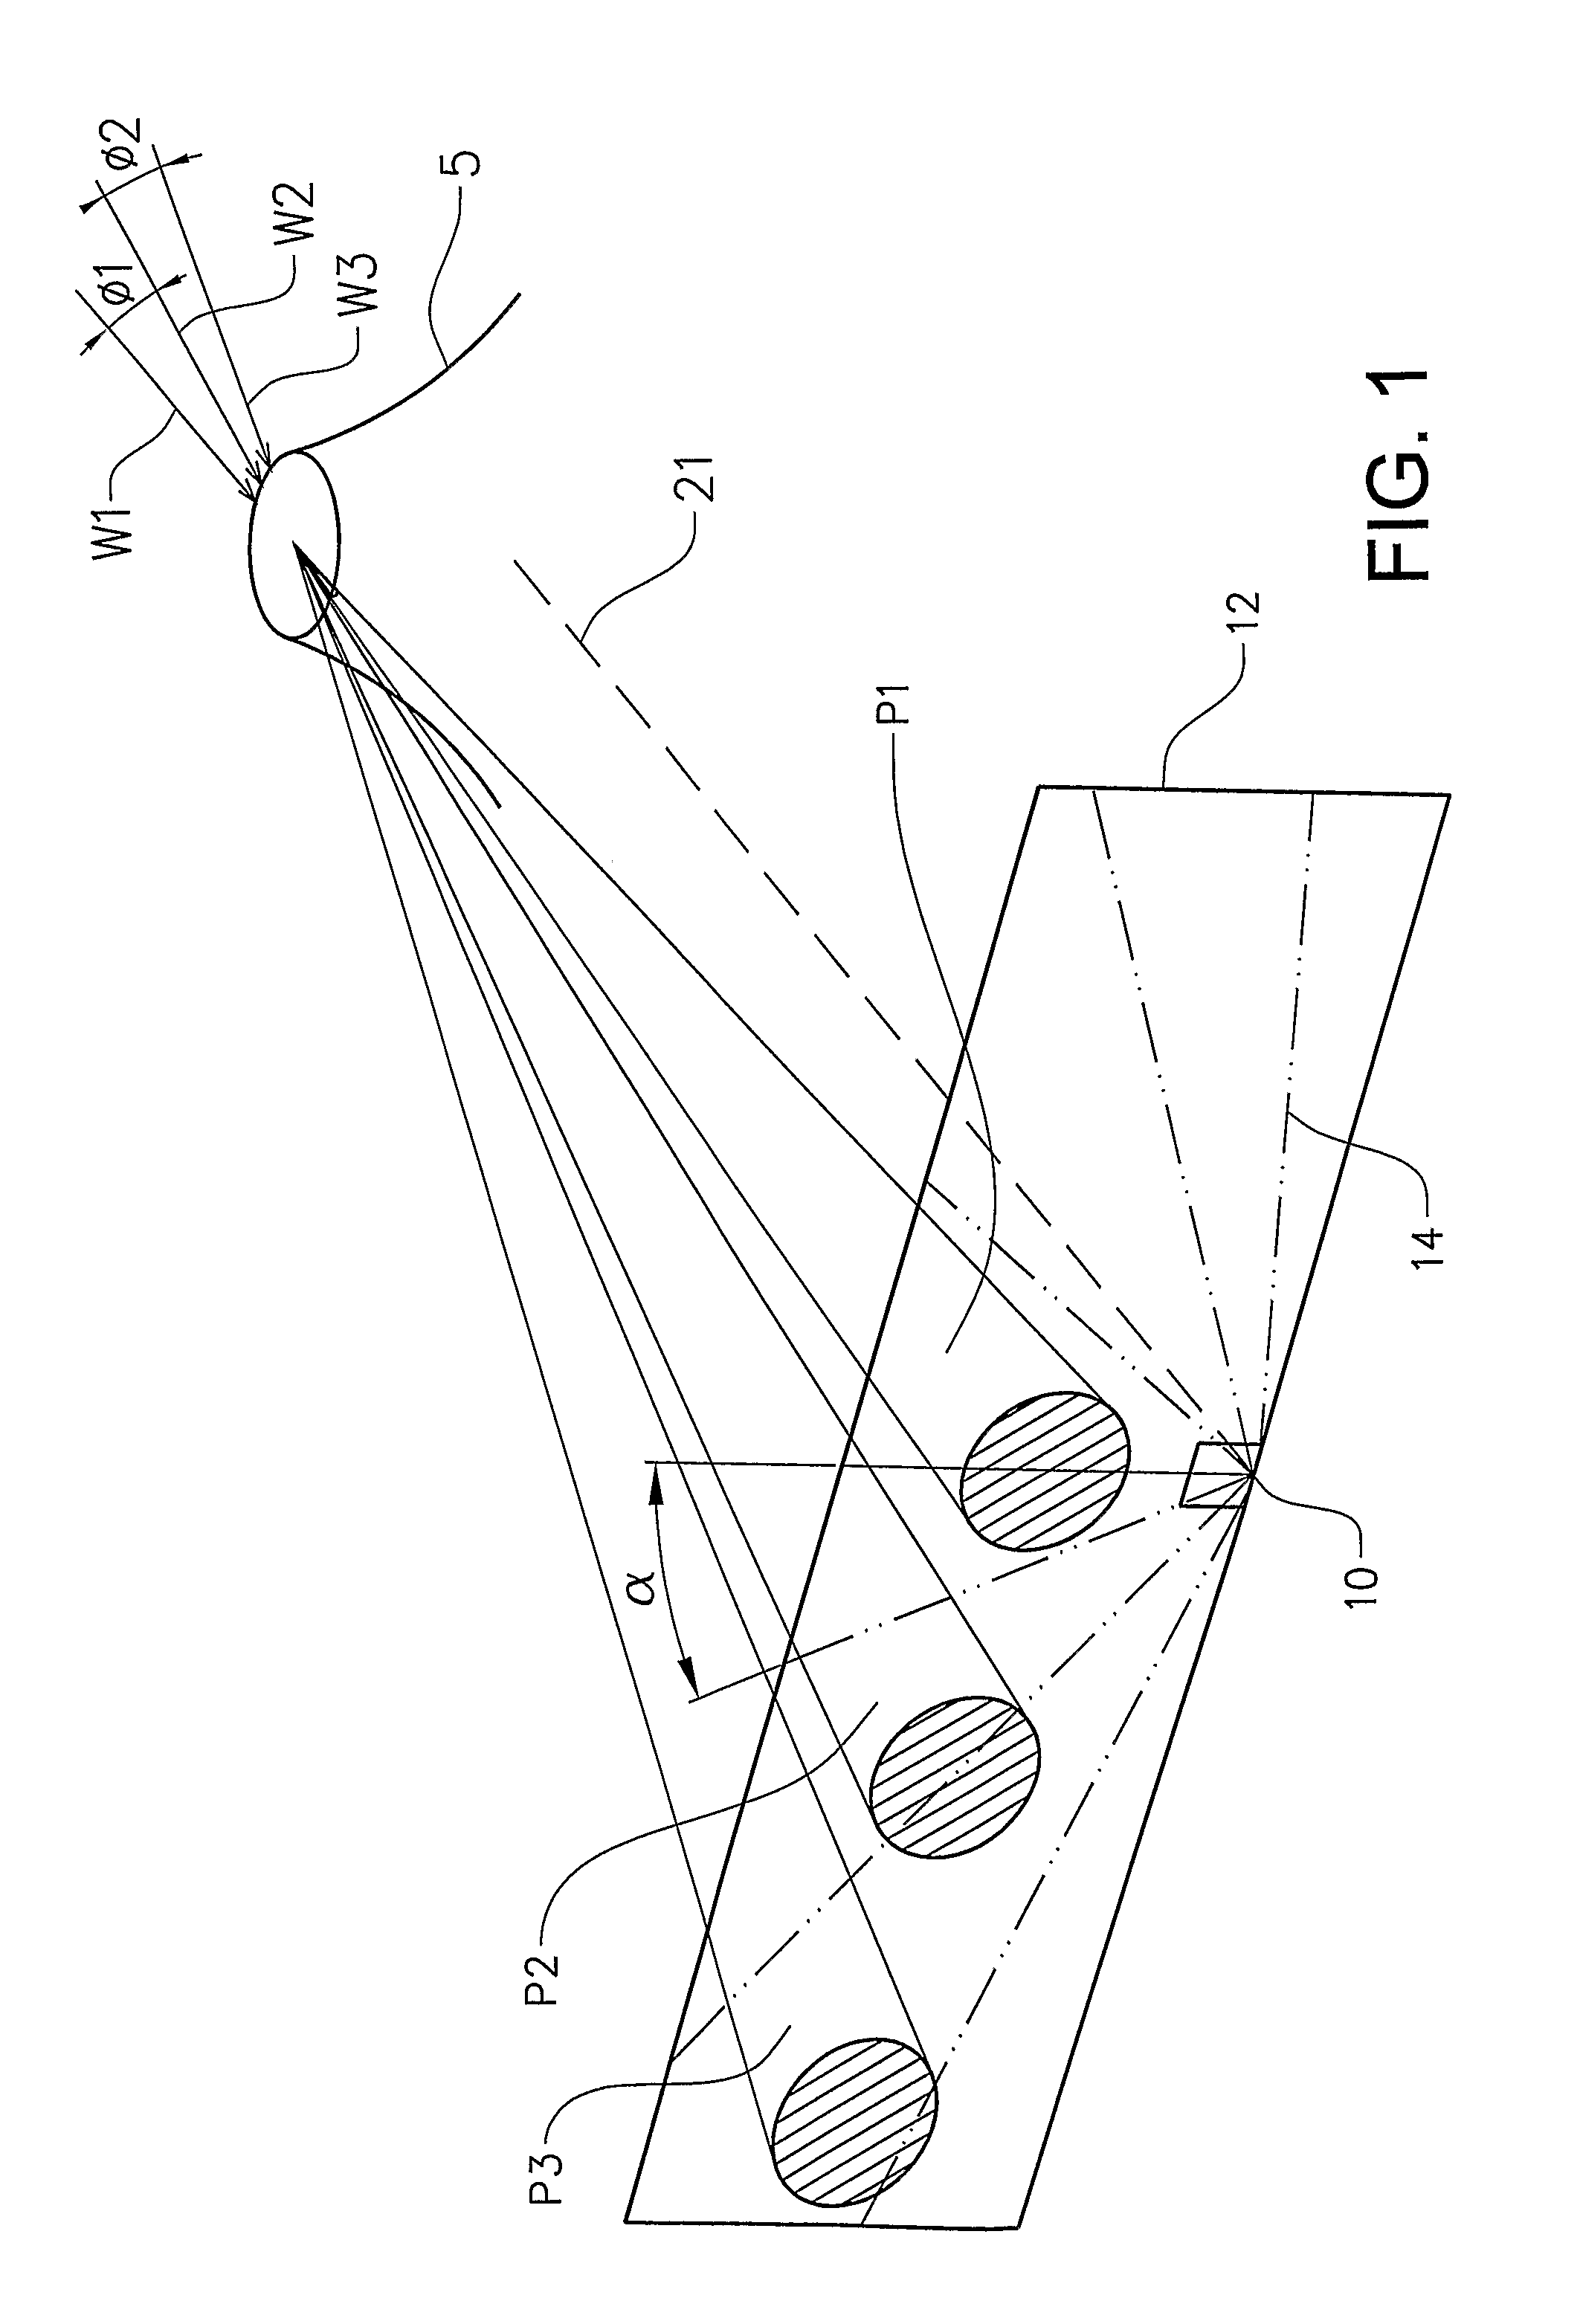 Method and device for measuring emissions of gaseous substances to the atmosphere using scattered sunligt spectroscopy